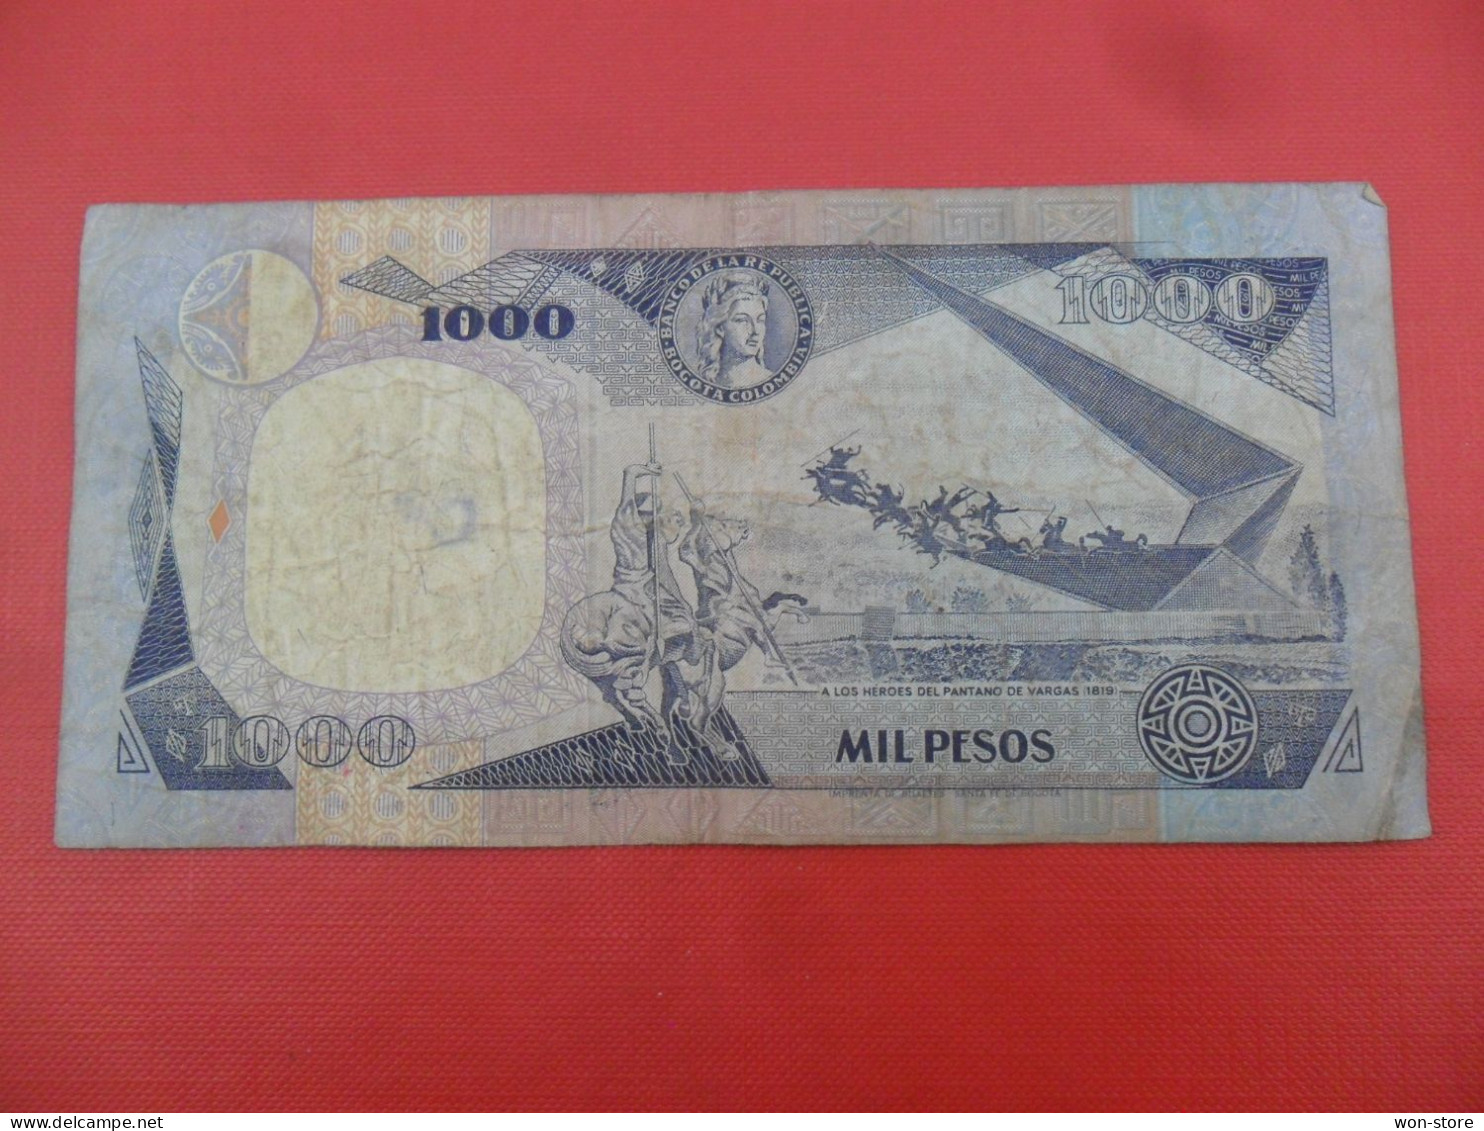 9633, 9634 - Colombia 1,000 Pesos 1995 - Colombia